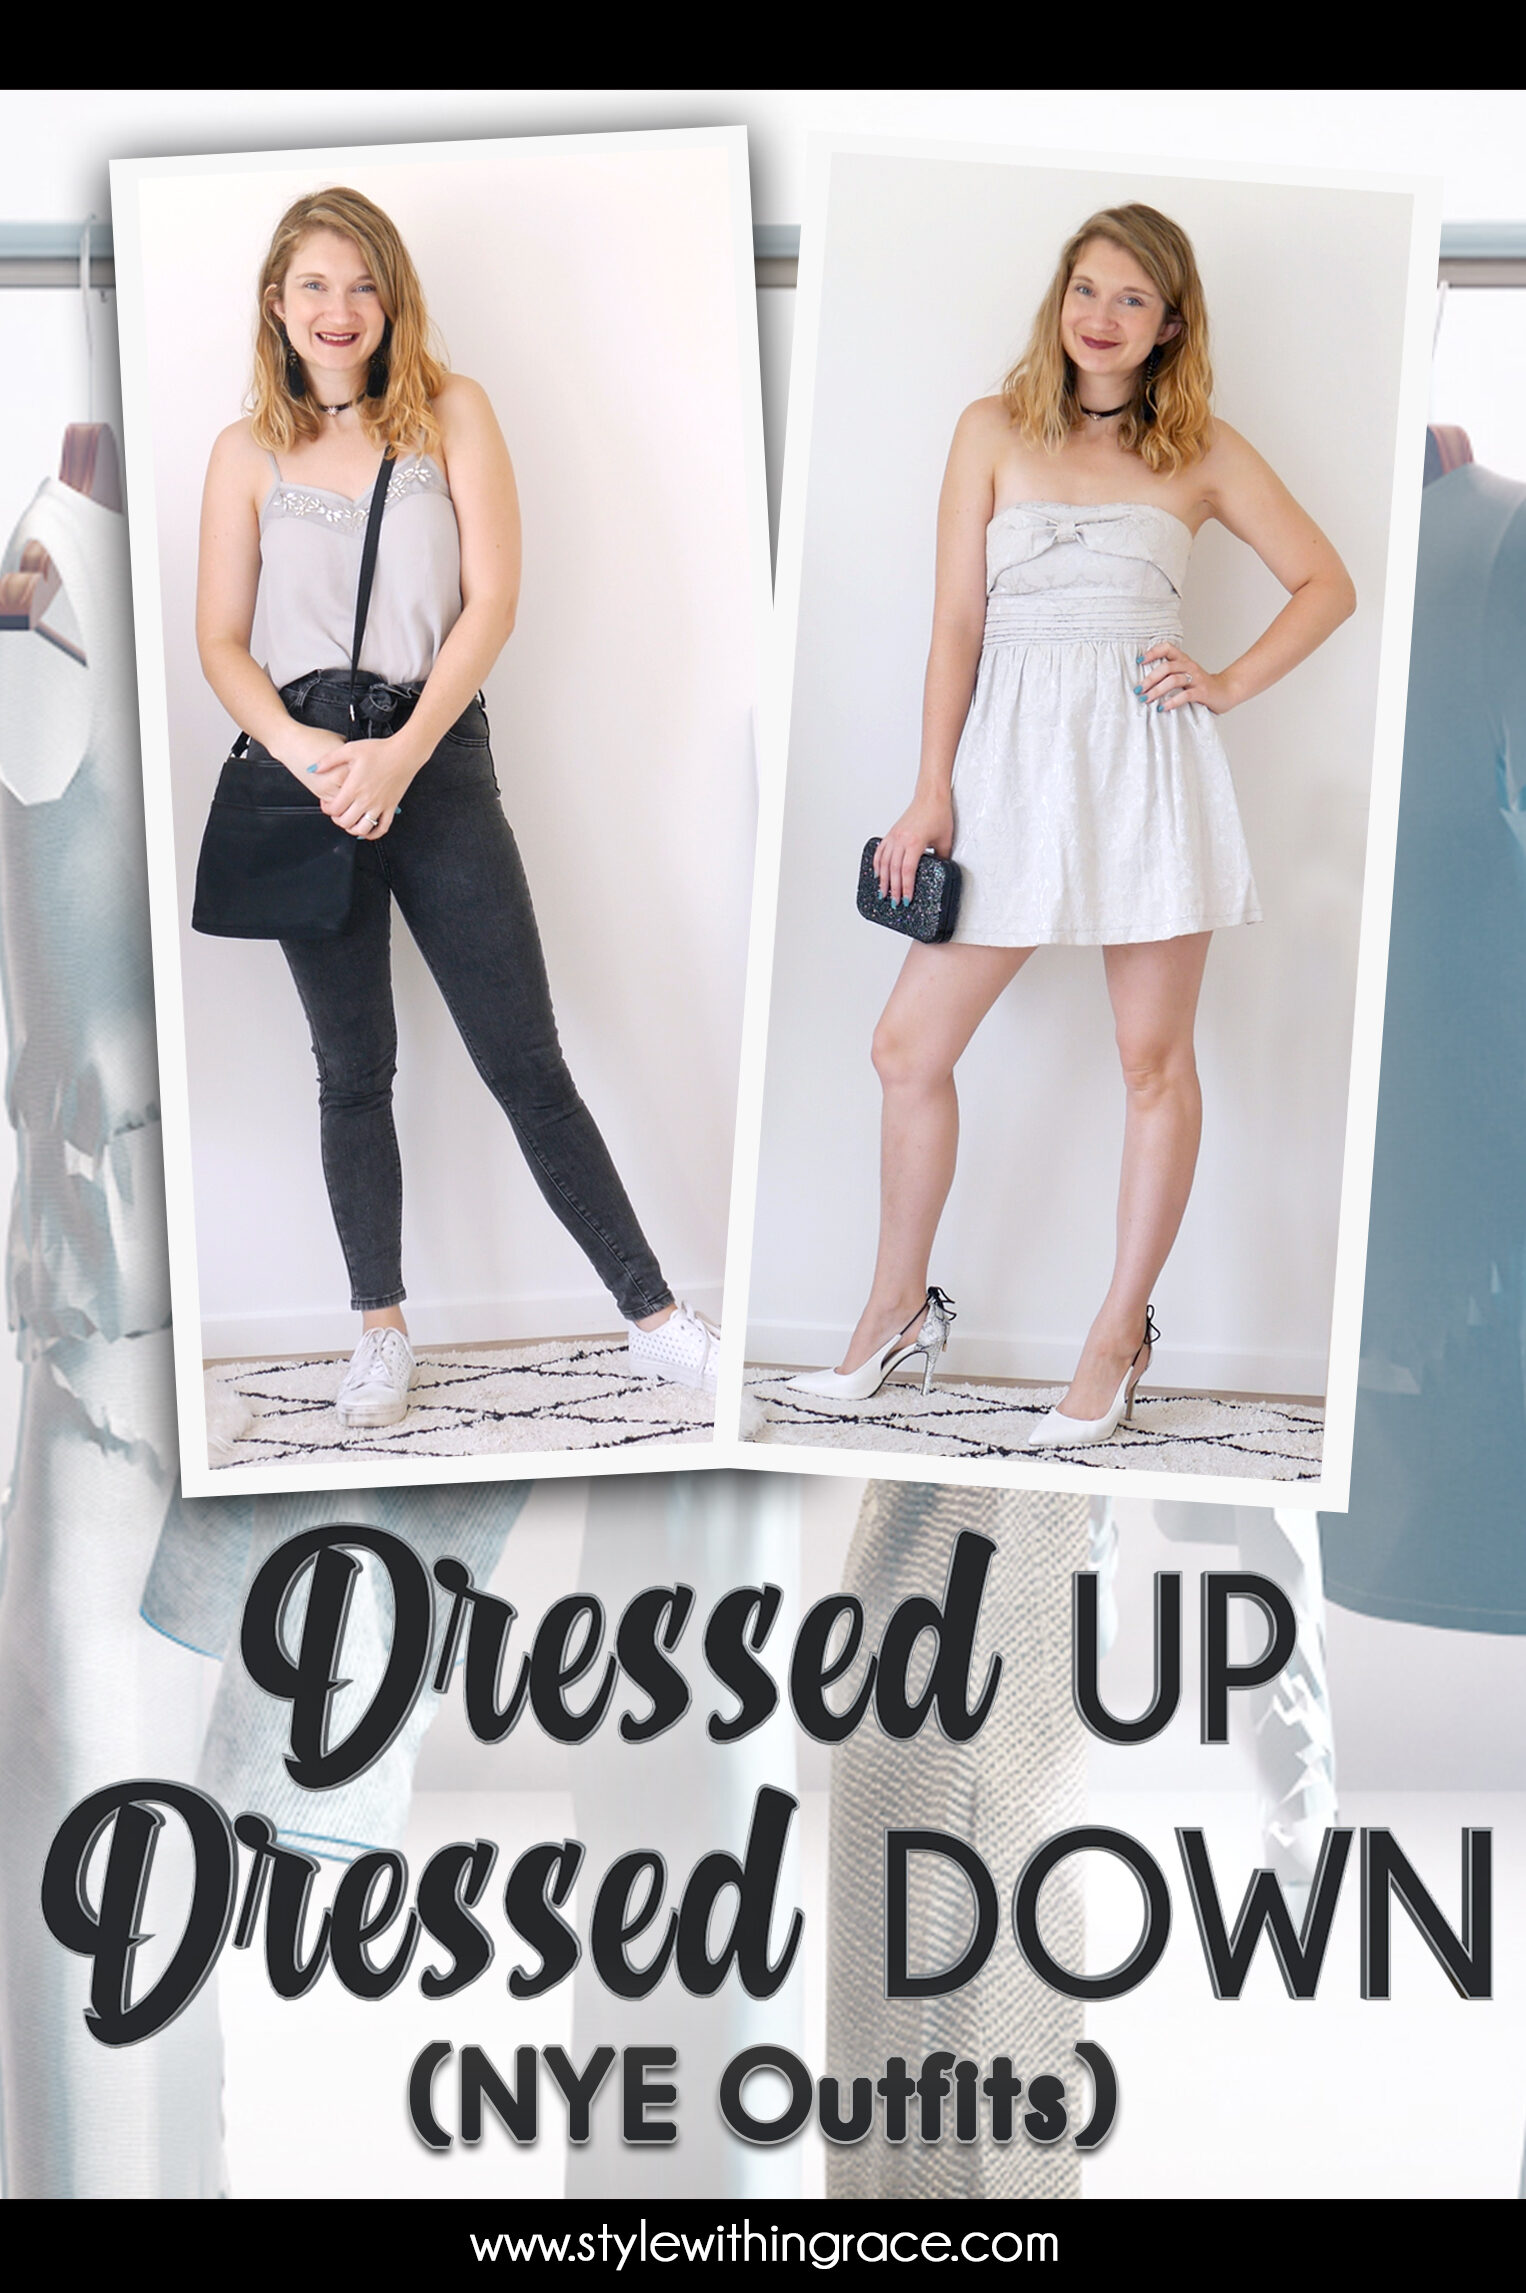 Dressed Up Dressed Down (NYE Outfits) Pinterest